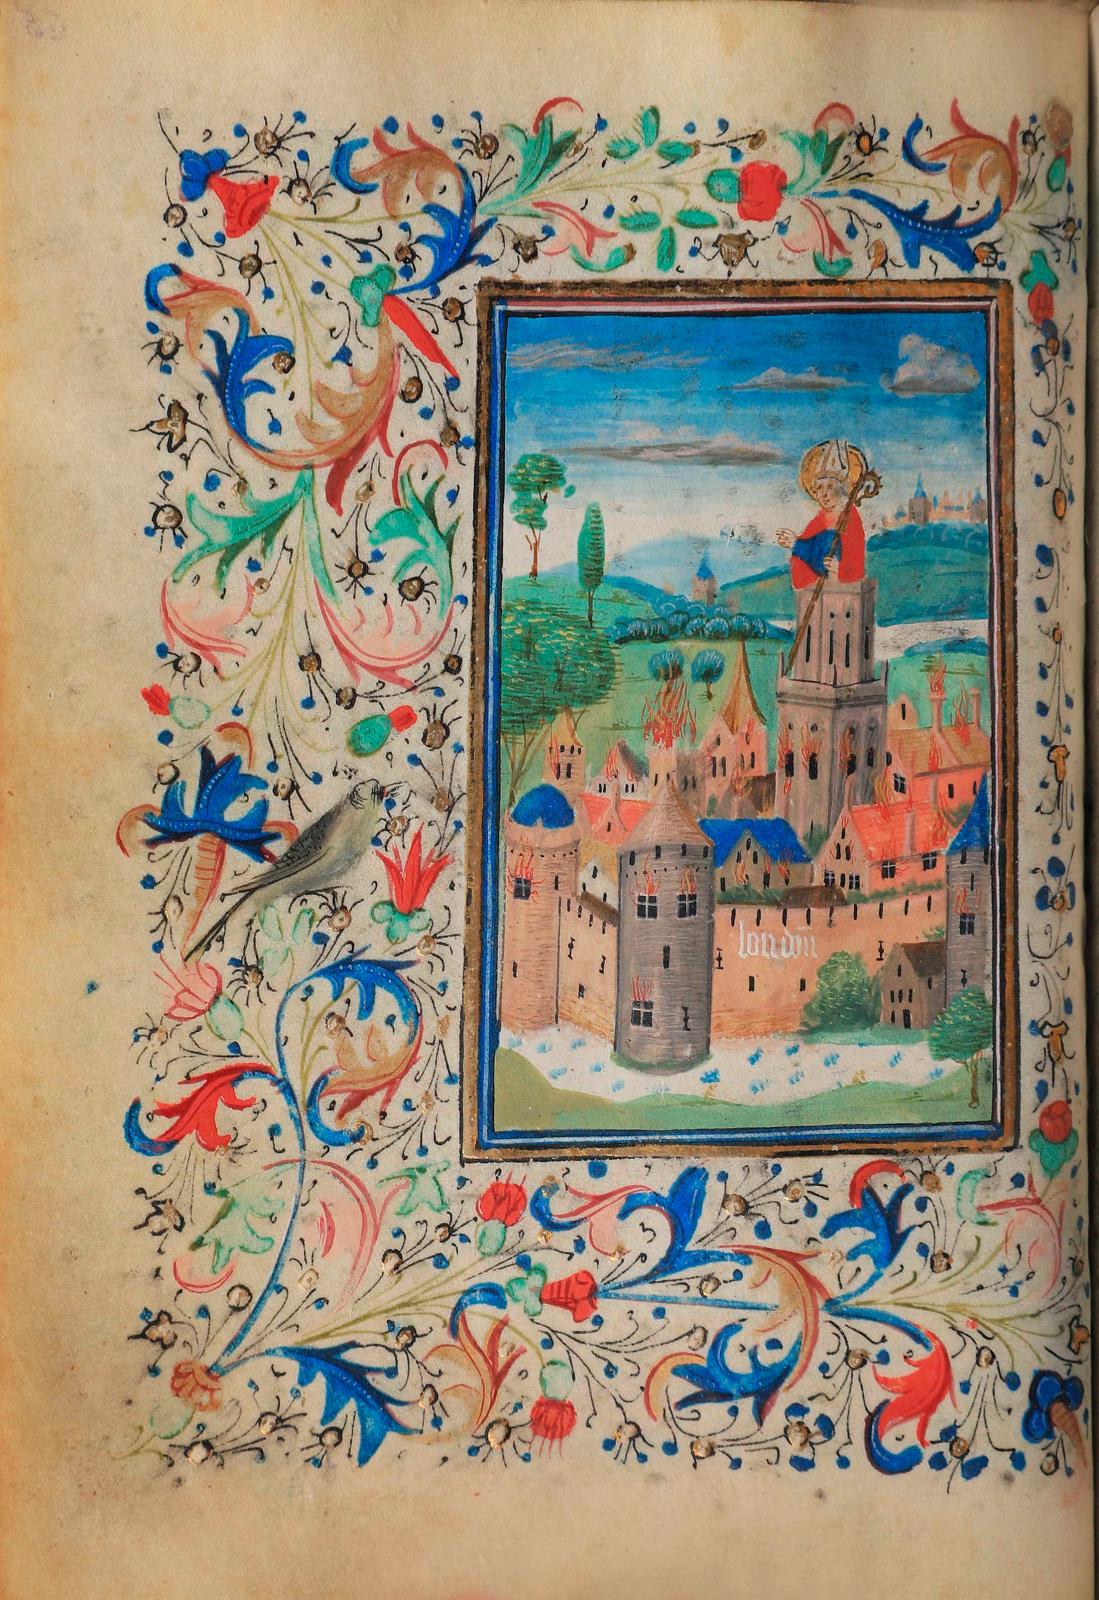 The Holy and Intimate Hours of the Middle Ages